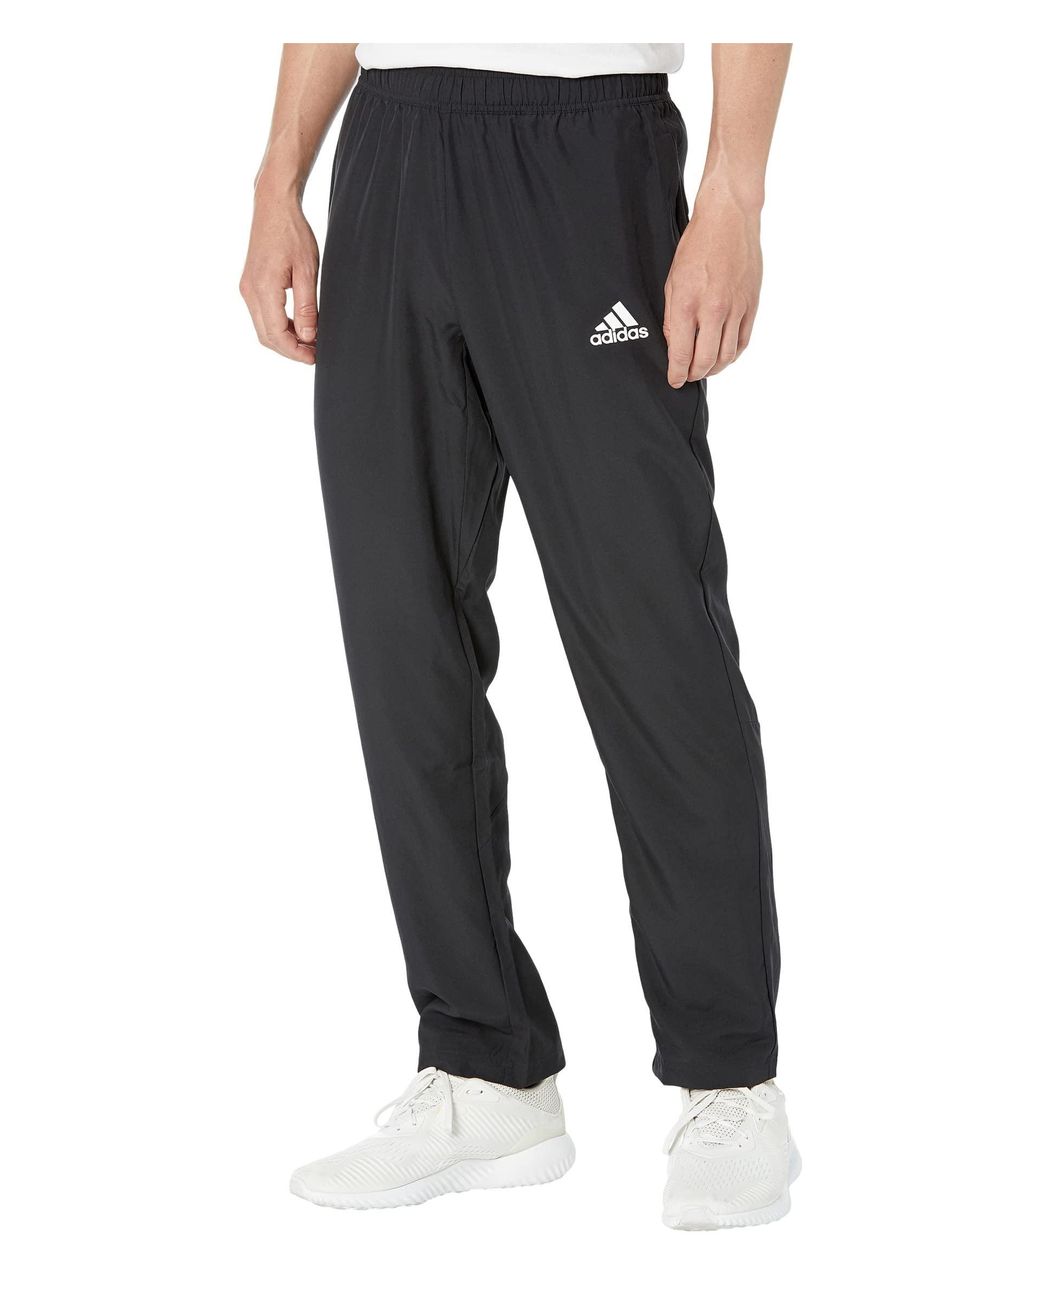 adidas Synthetic Designed 2 Move Woven Pants in Black for Men - Save 25% |  Lyst